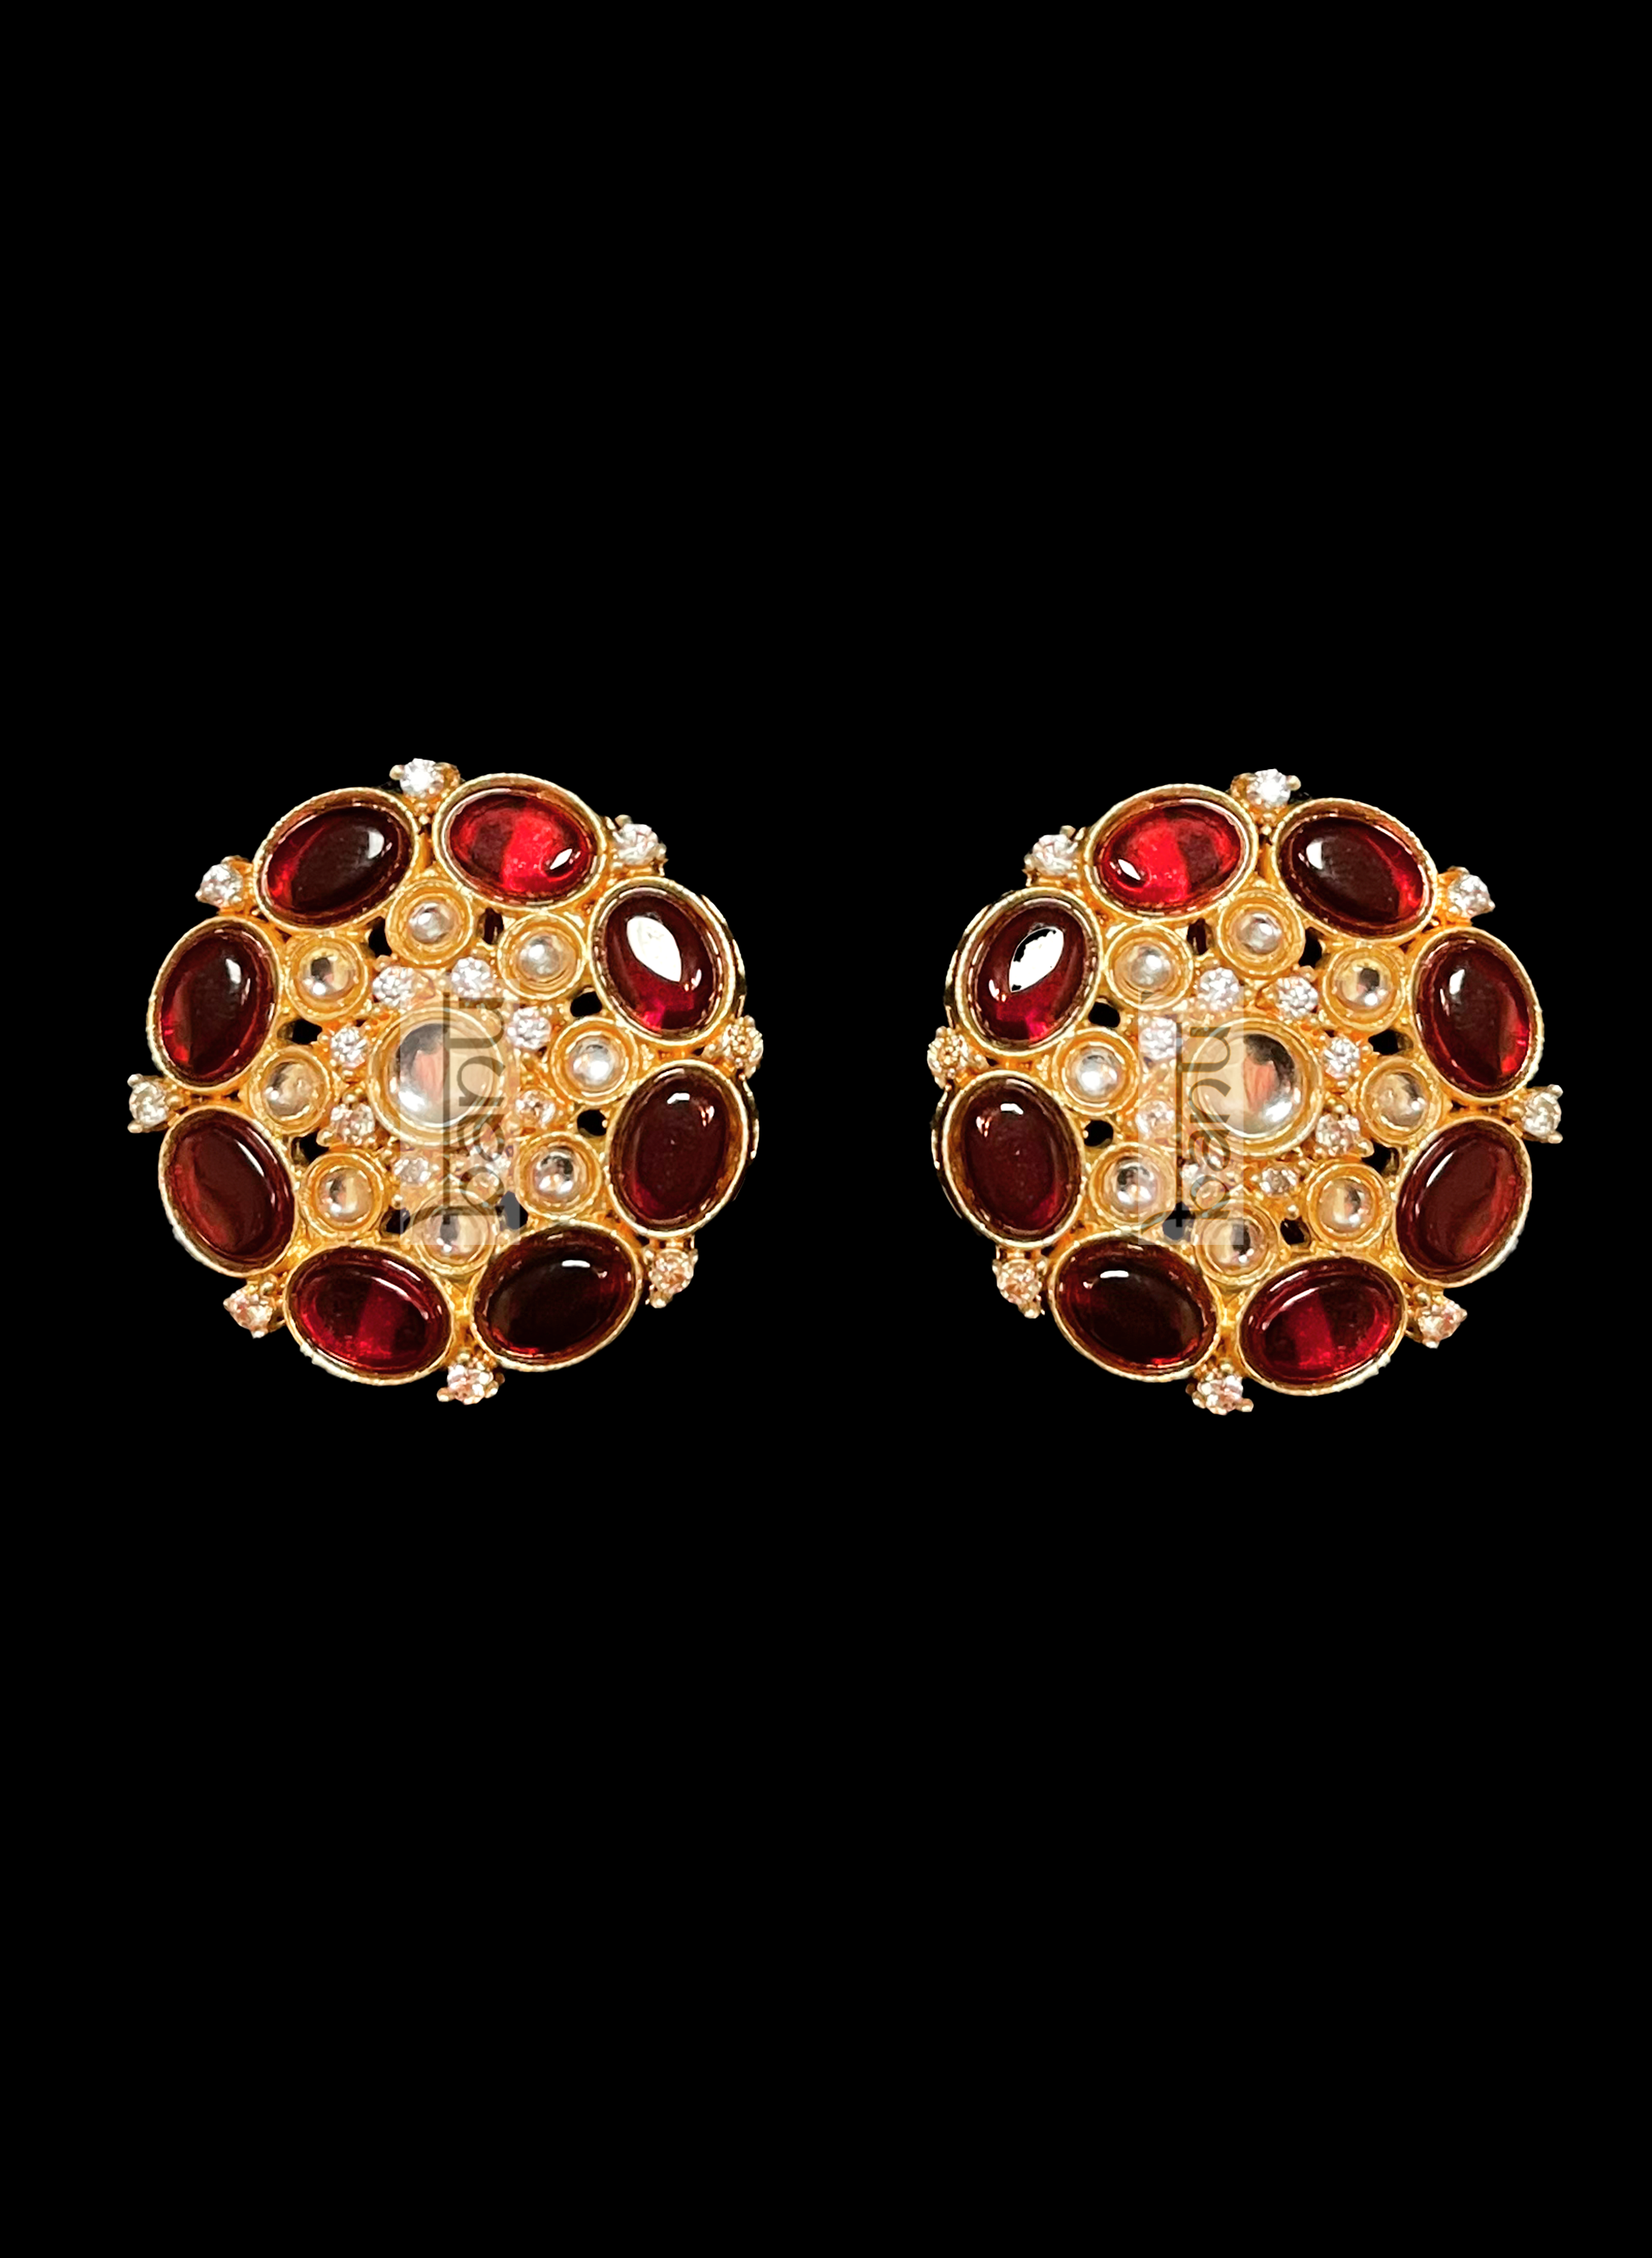 Red Stud Earrings - Indian Bridal Jewelry for Women